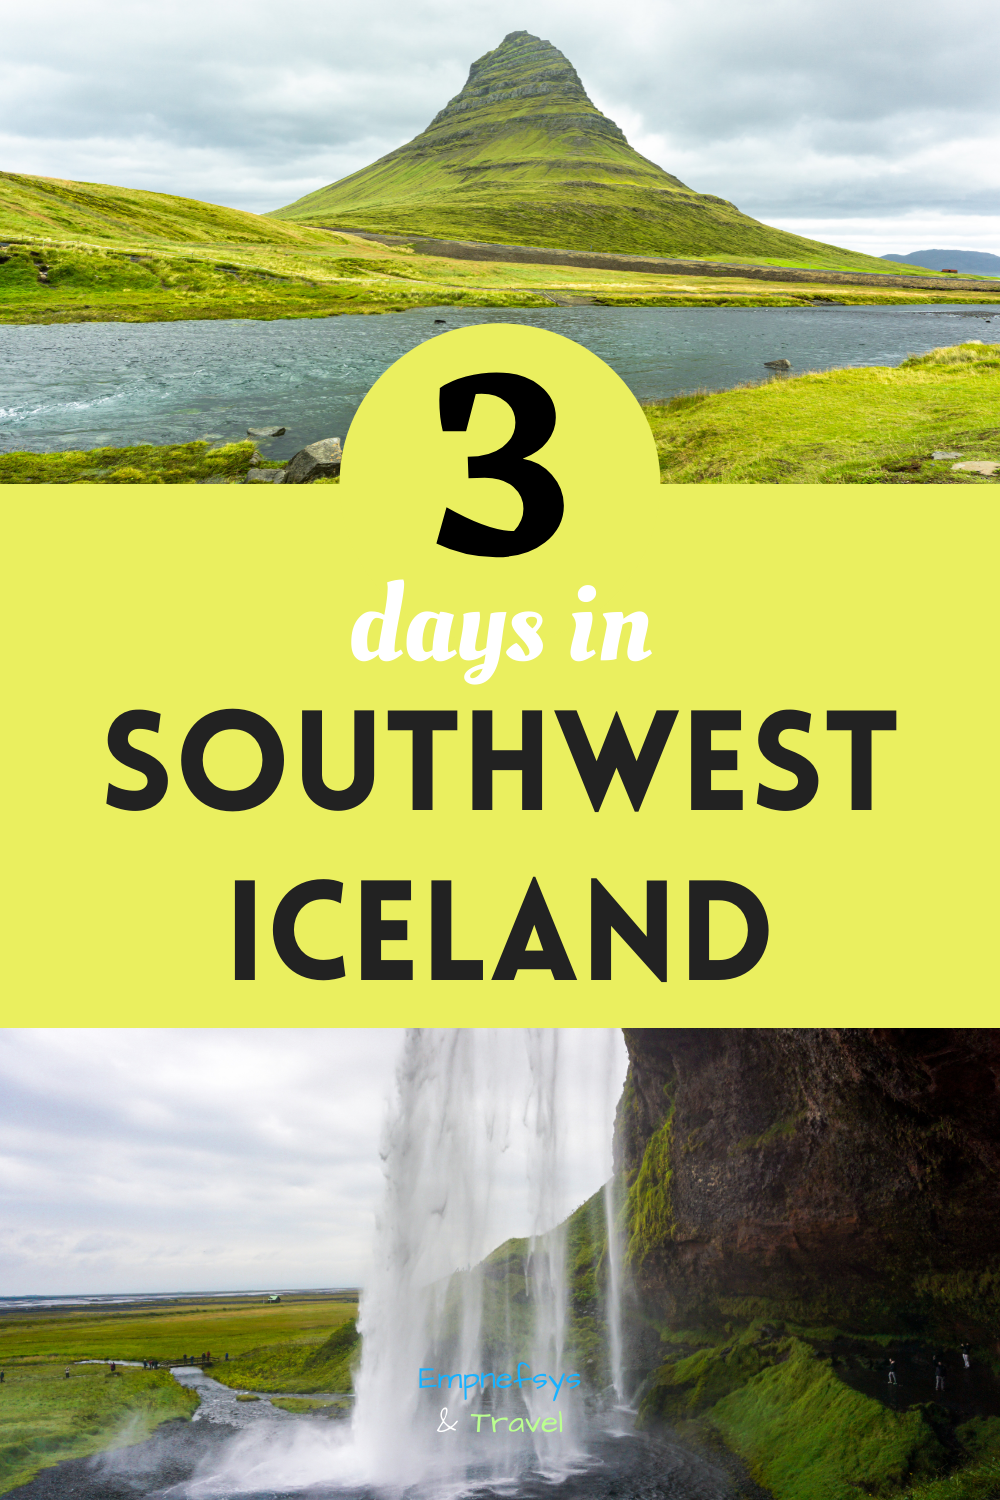 3-, 5- & 7- Day Iceland Itineraries Pinterest Graphic 1 Pinterest Graphic